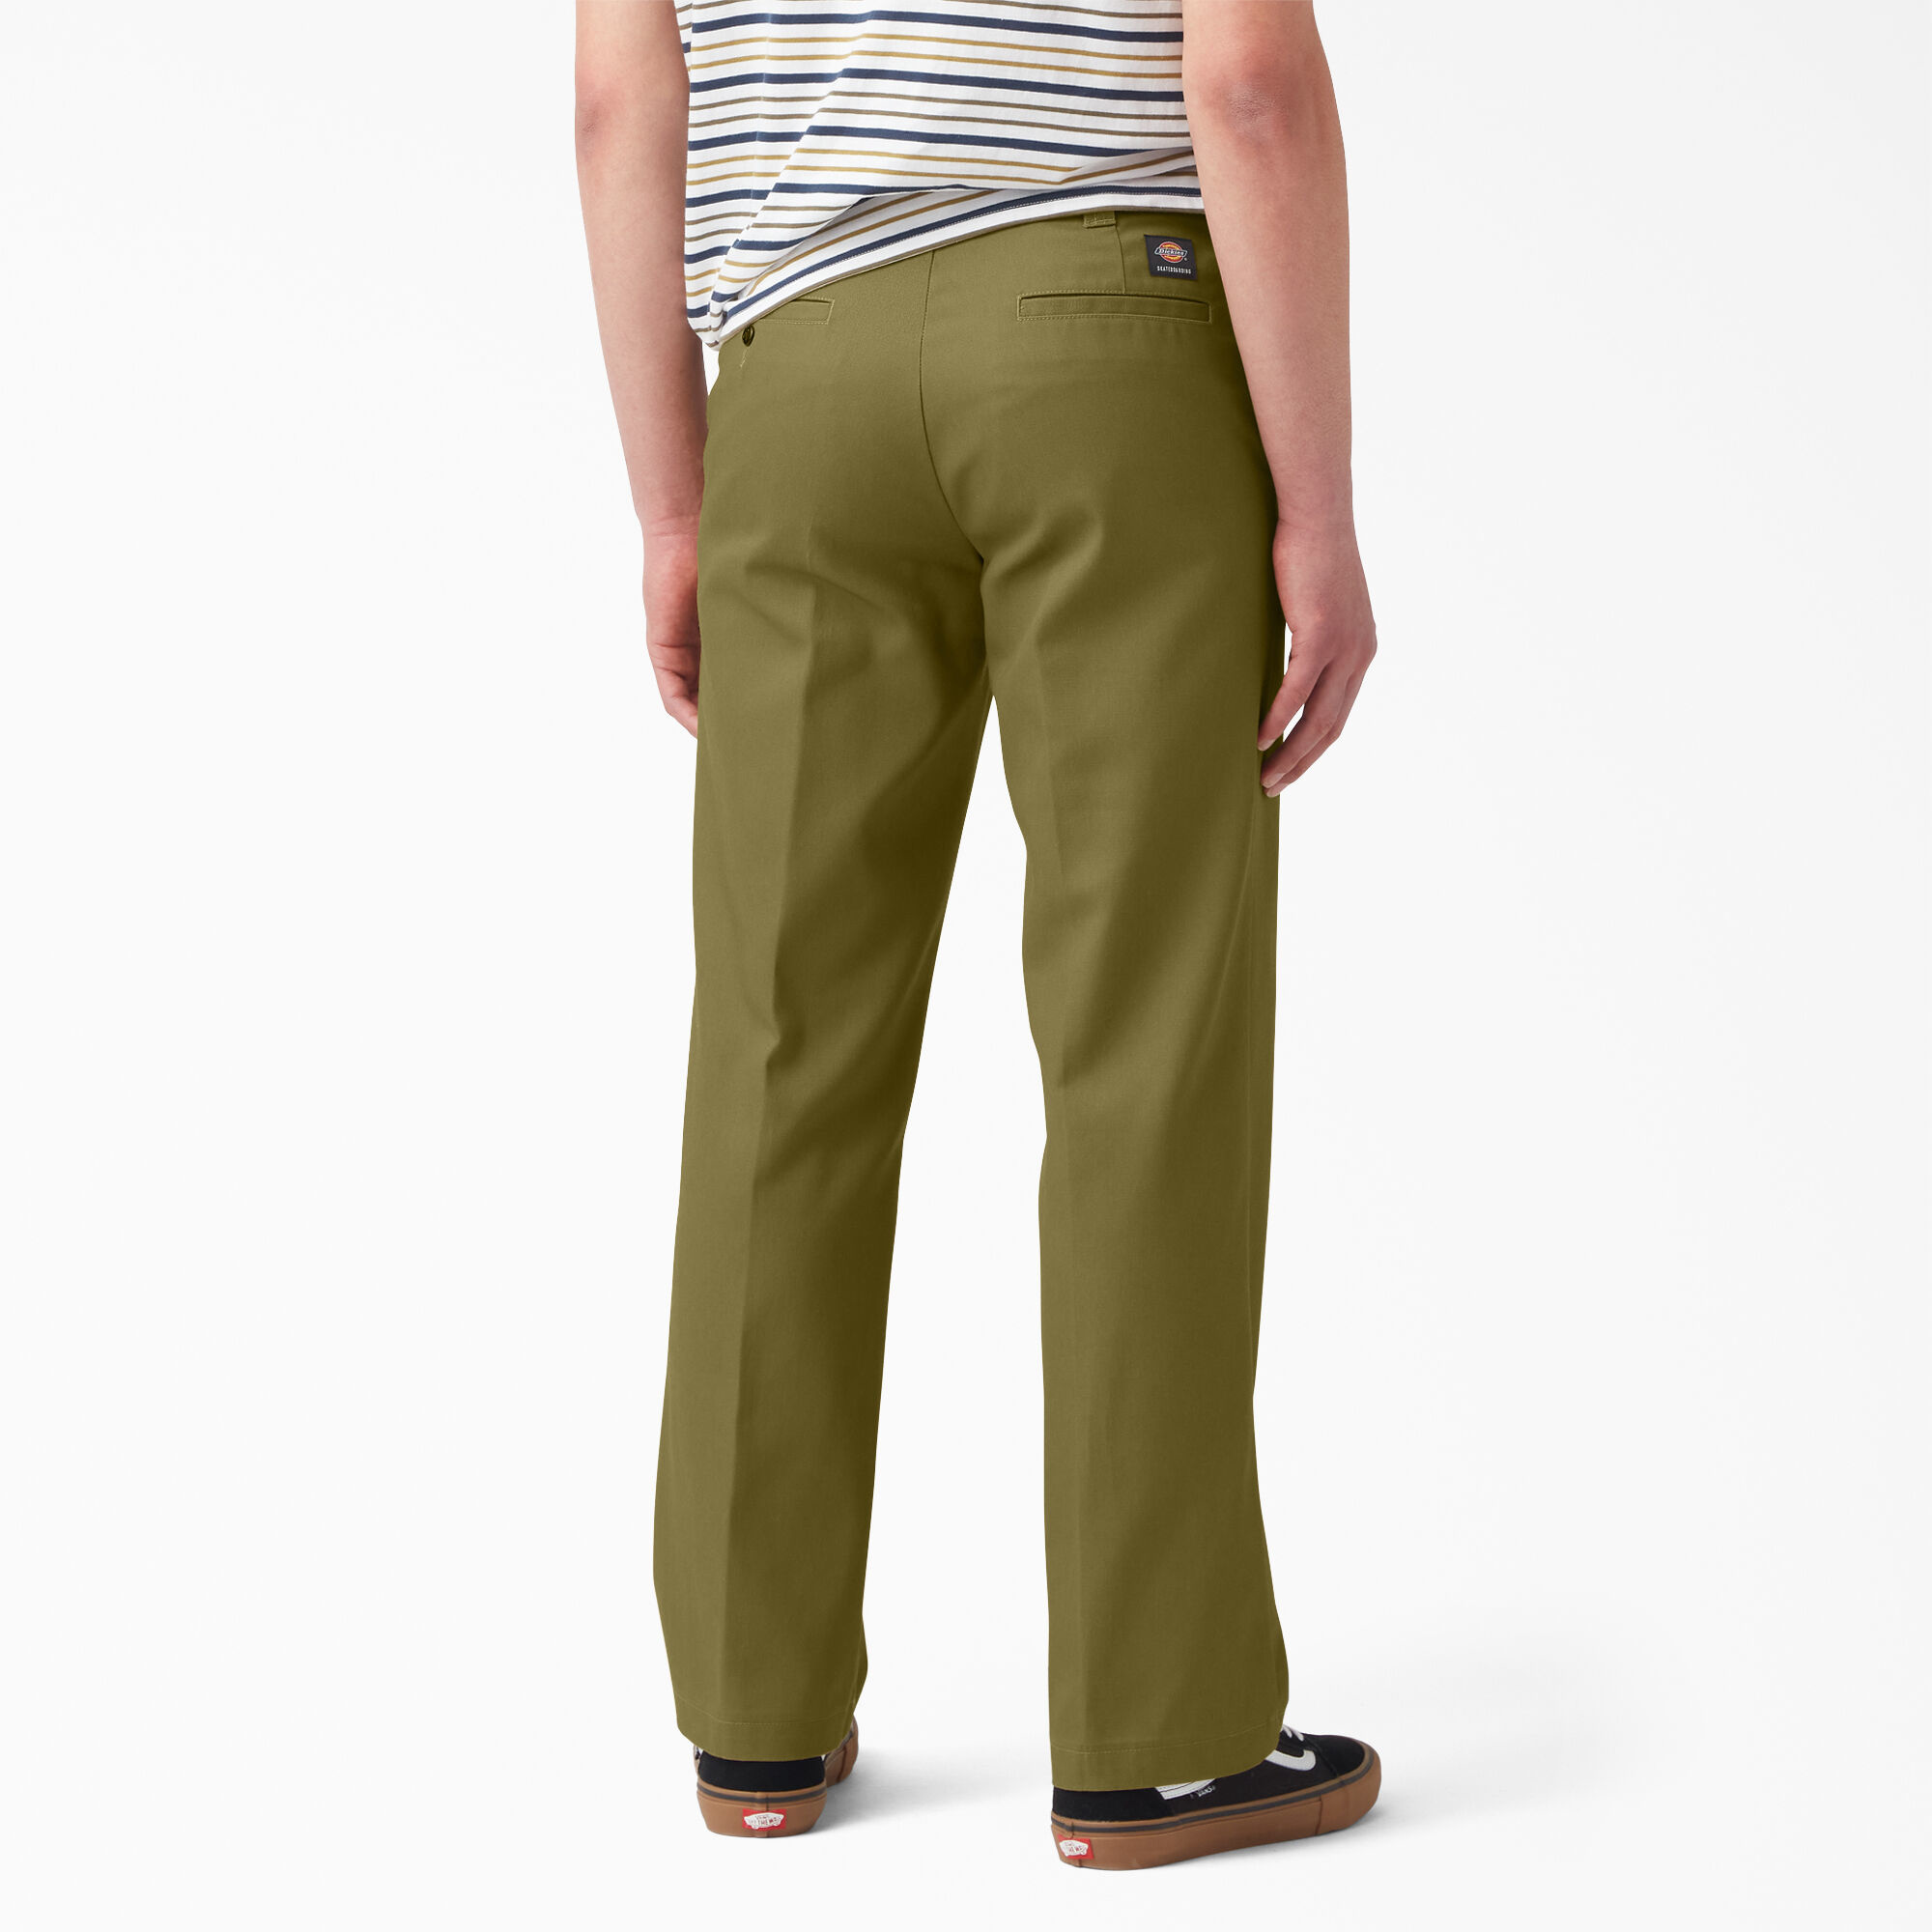 DICKIES SKATE TWILL PANT G2M - The Choice Shop